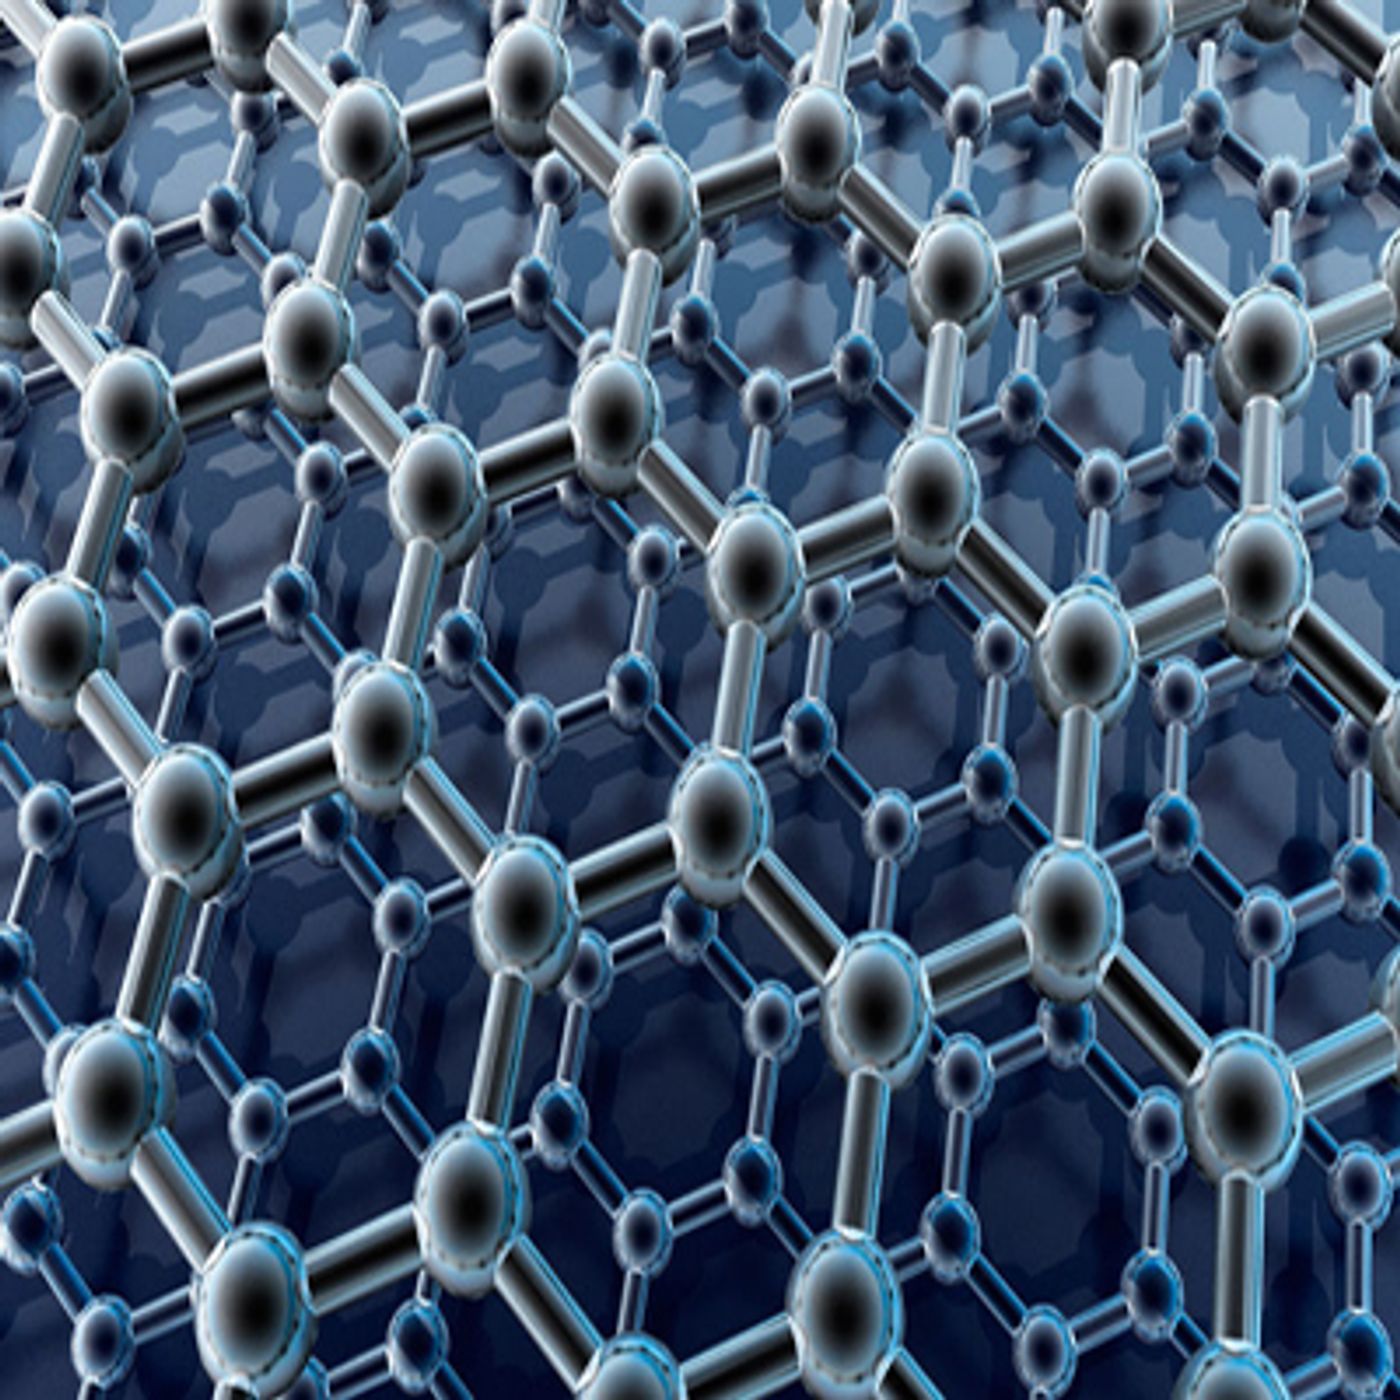 Graphene, the atom-thick carbon material, acts as a superconductor when two sheets are layered at a specific angle. Credit: Laguna Design/Getty